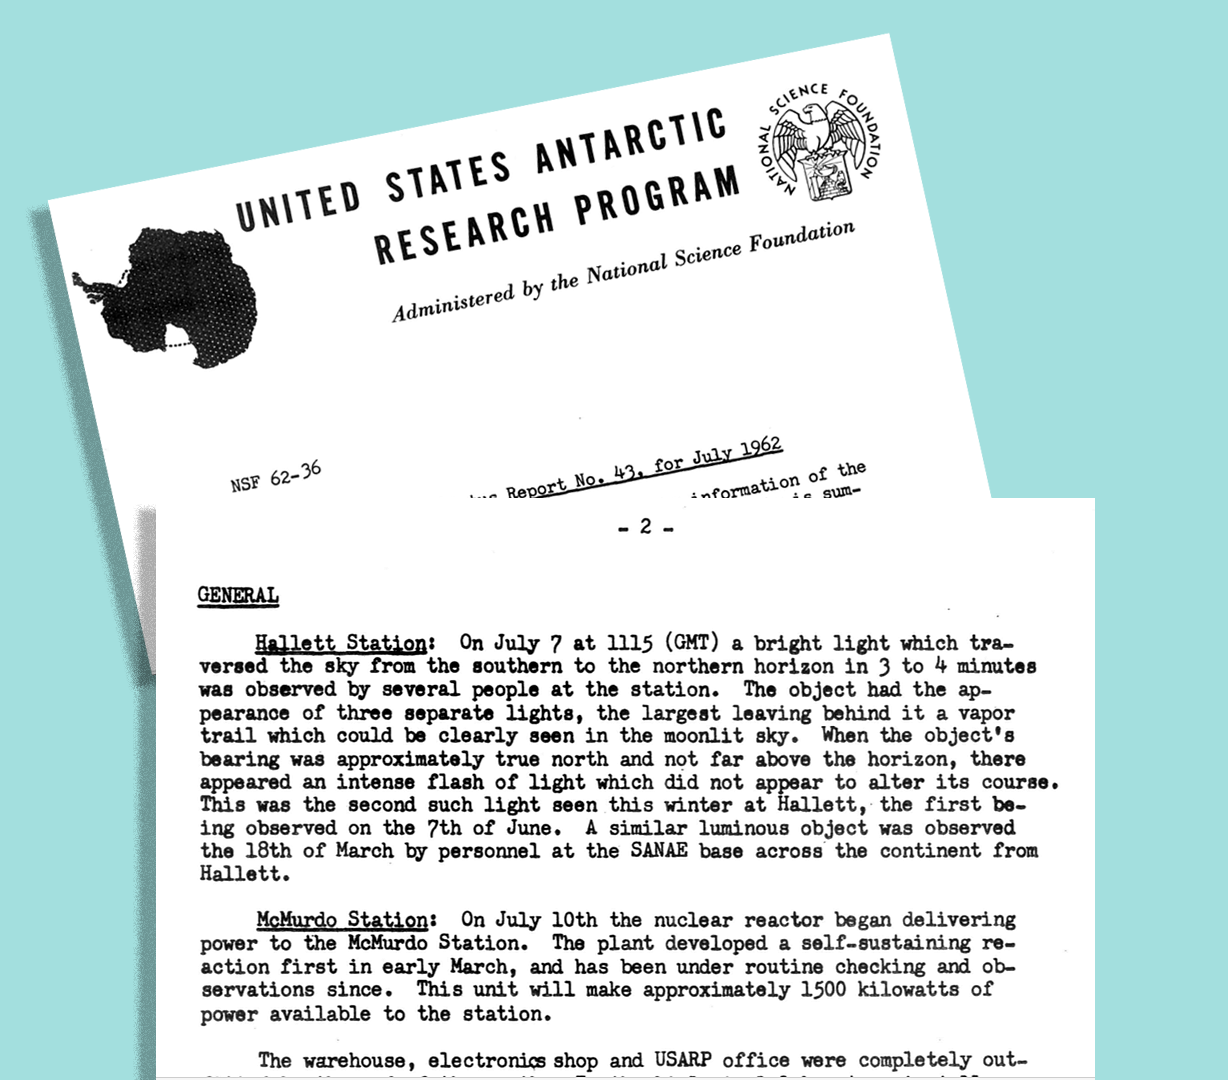 Image of the documents that mention the UFO sighting over Antarctica